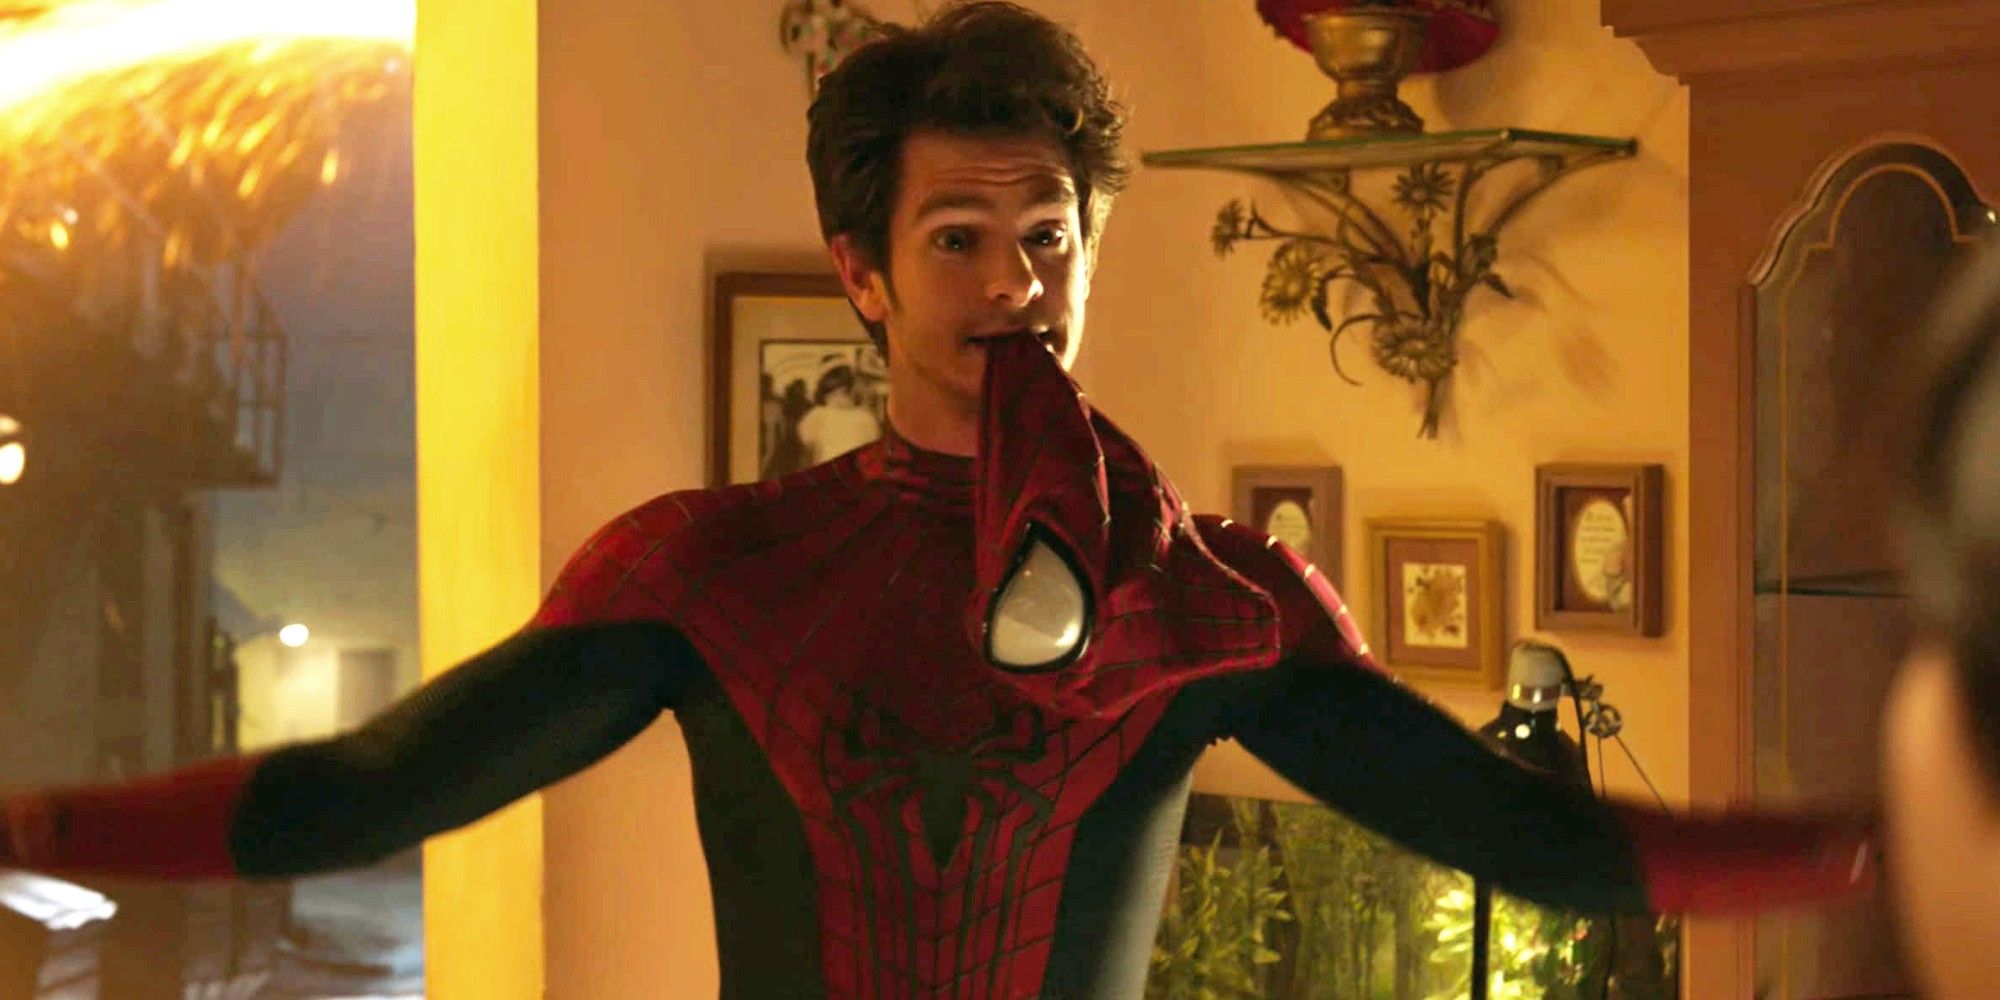 Andrew Garfield as Peter Parker in Spider-Man No Way Home